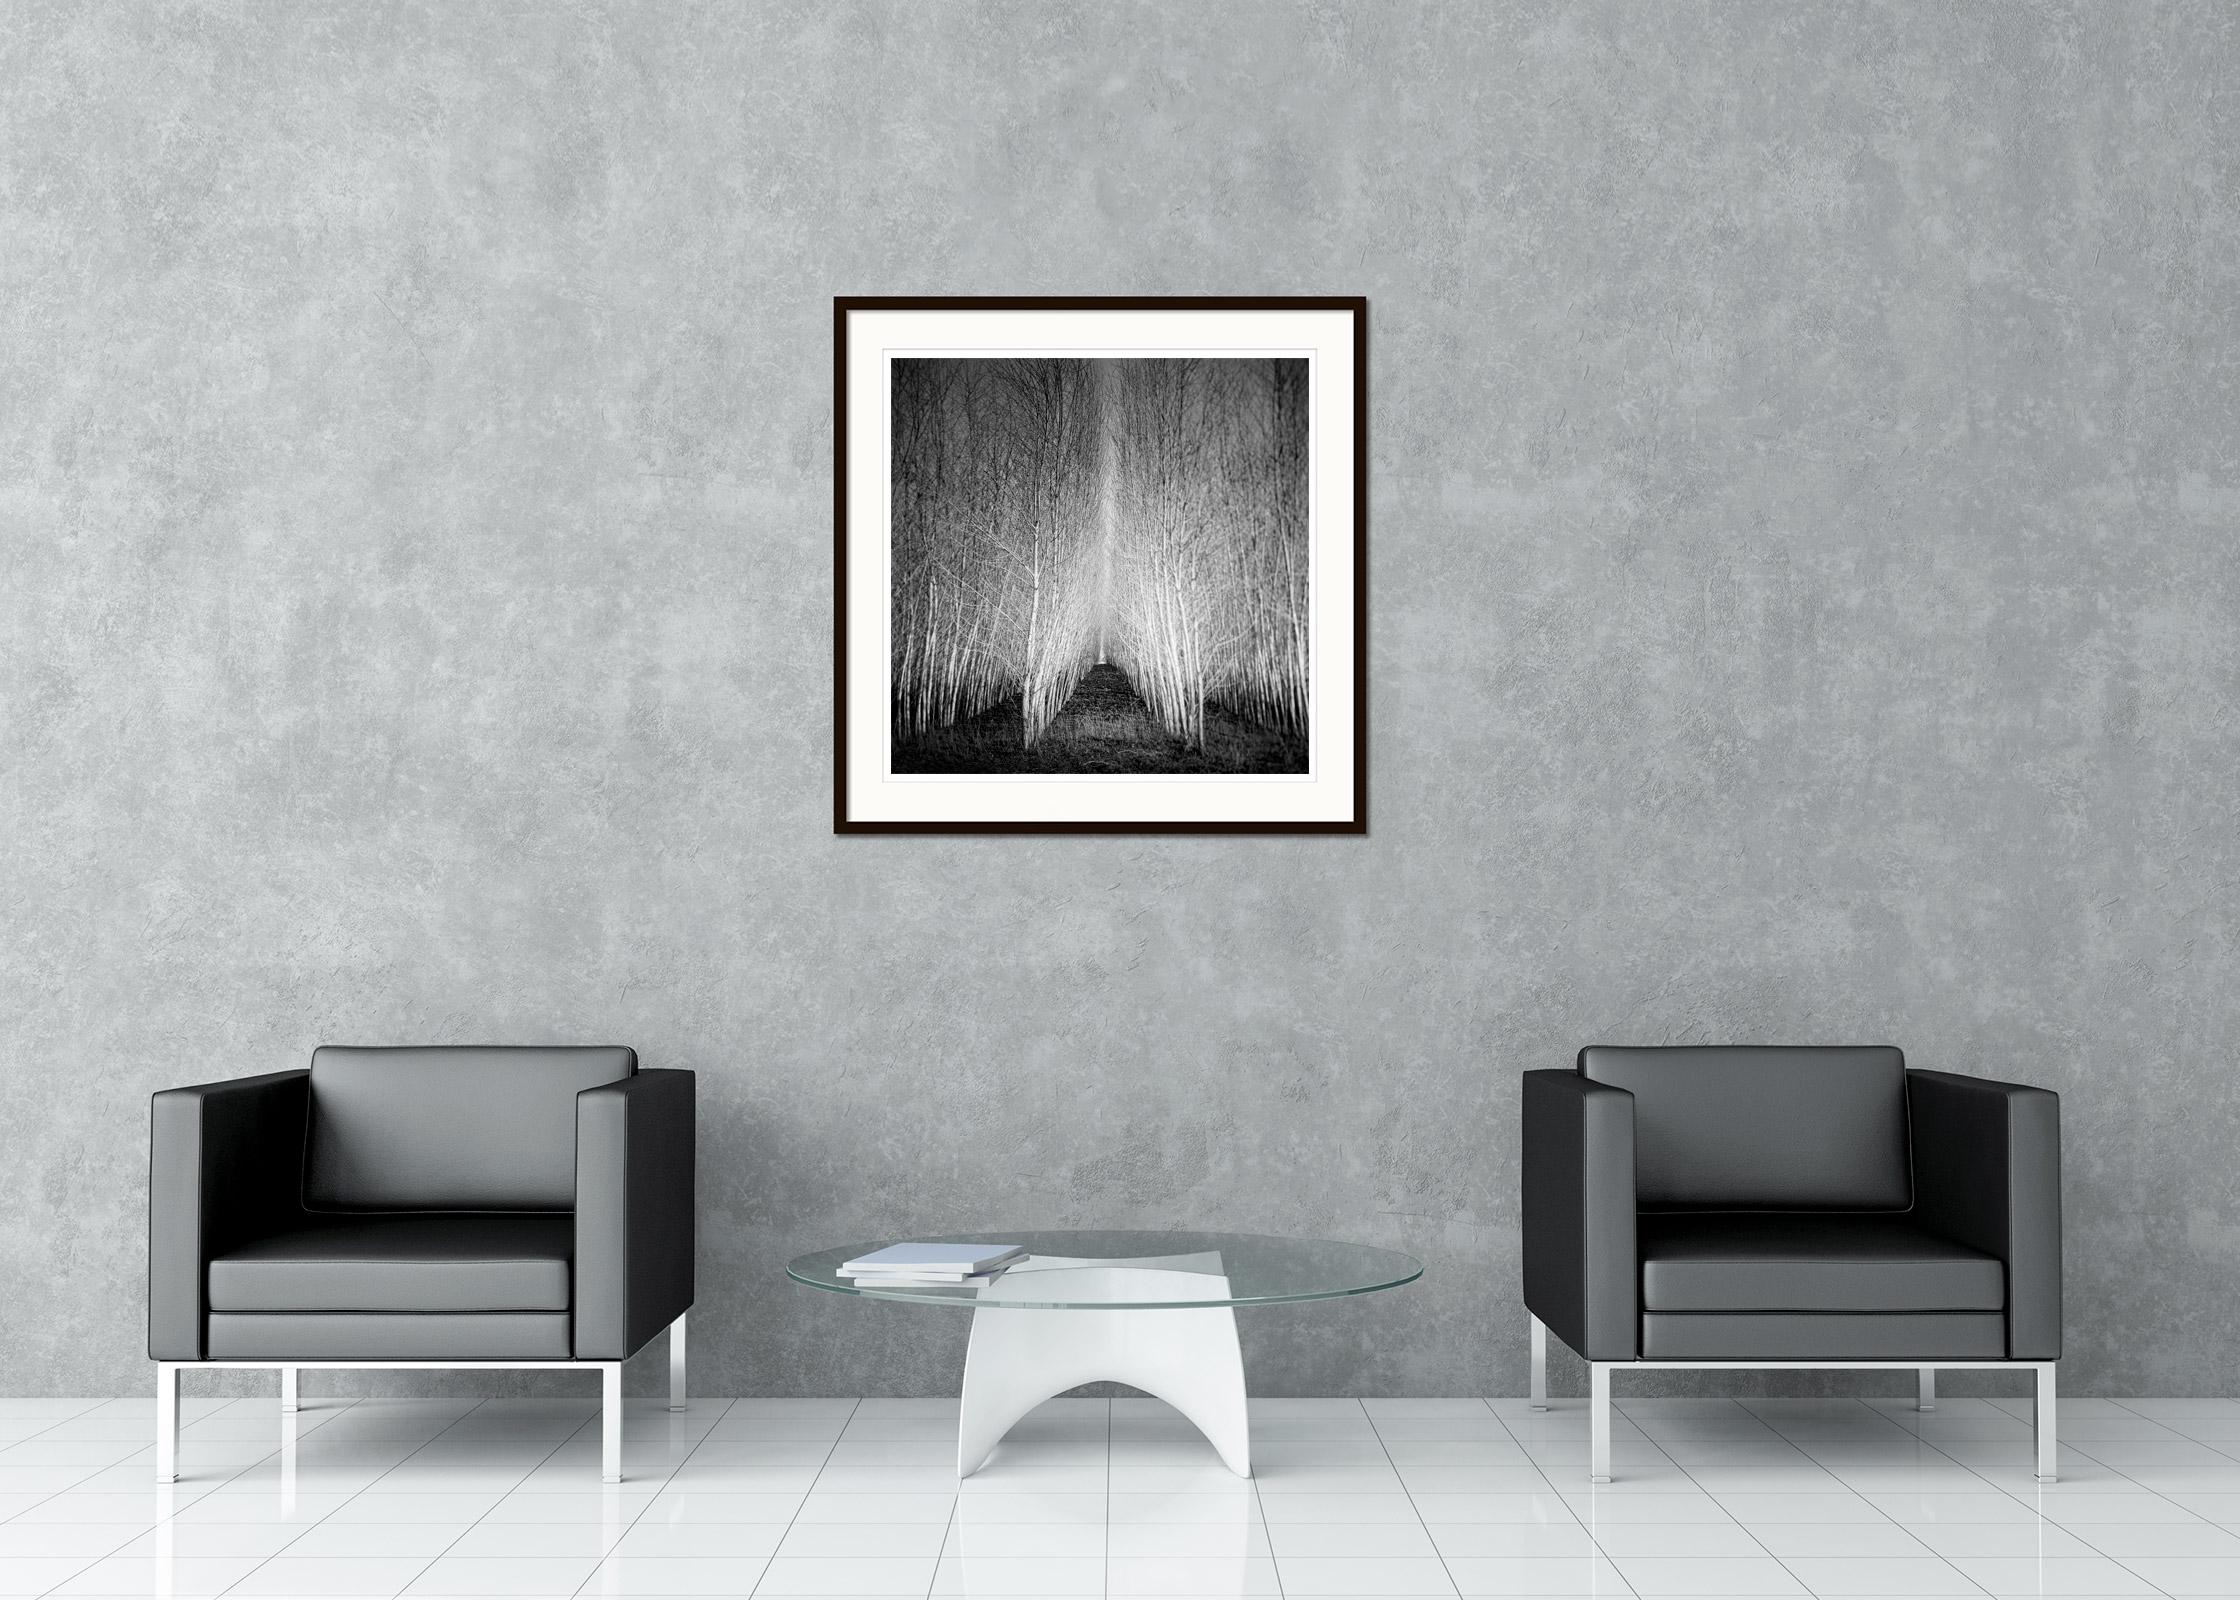 Black and White Fine Art landscape photography. Archival pigment ink print, edition of 9. Signed, titled, dated and numbered by artist. Certificate of authenticity included. Printed with 4cm white border.
International award winner photographer